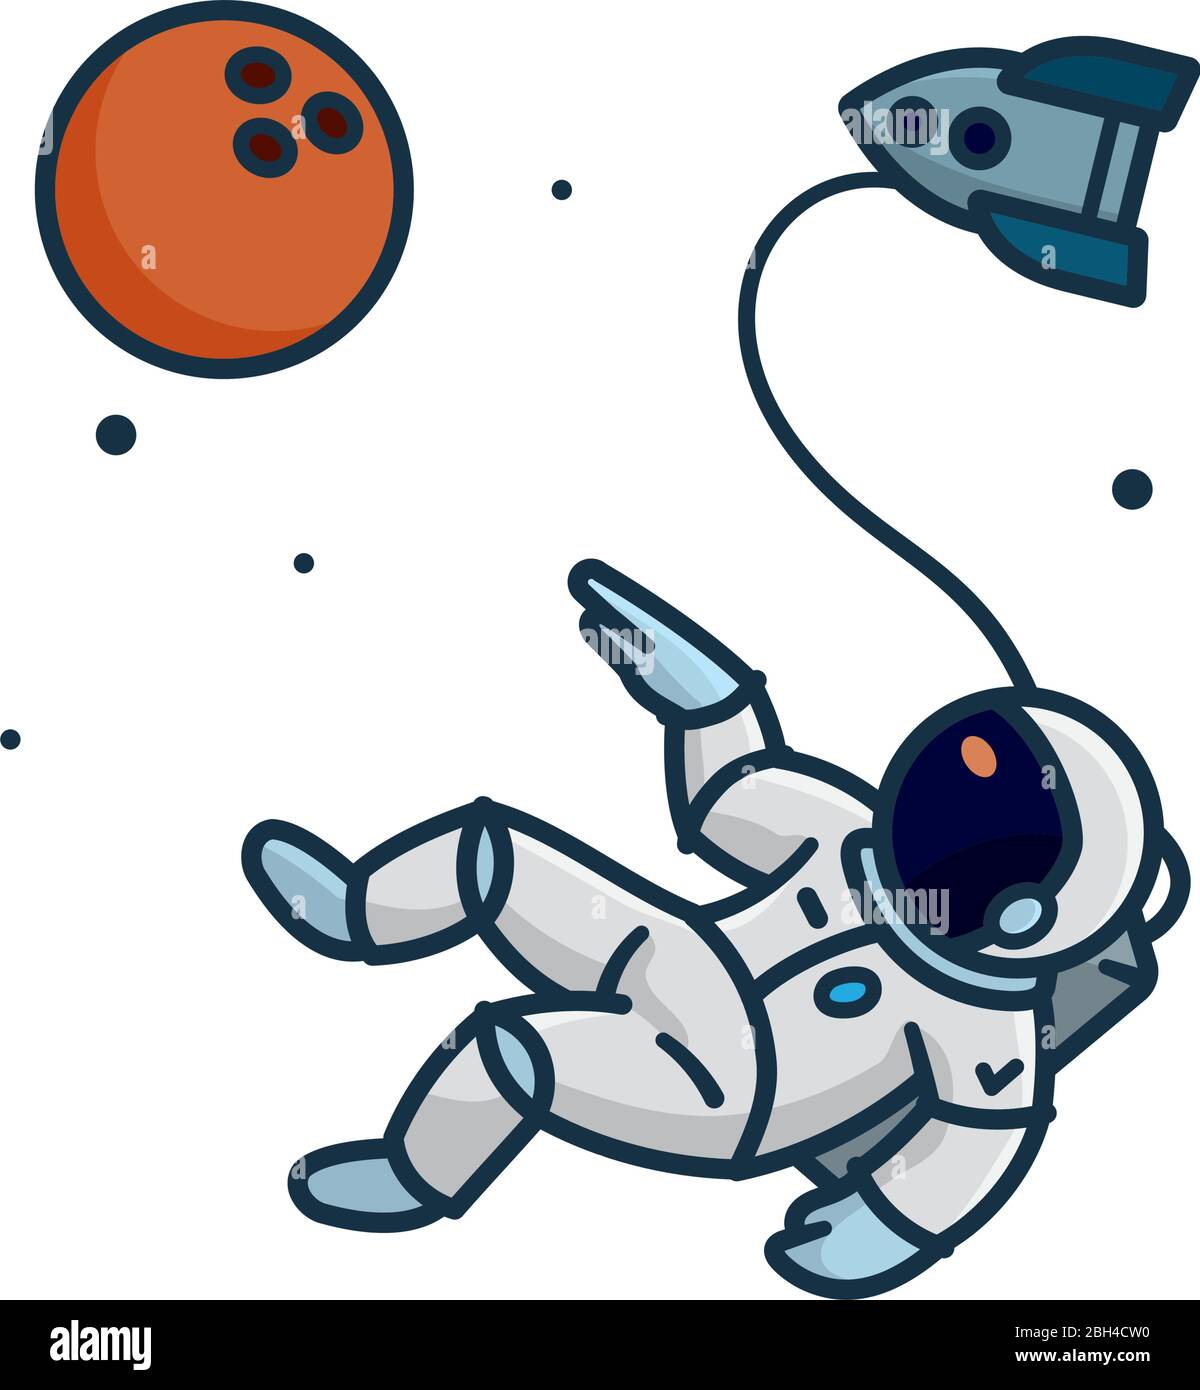 Astronaut walking in space, pointing at bowling ball shaped planet, isolated vector illustration for Space Day on May 1st. Stock Vector